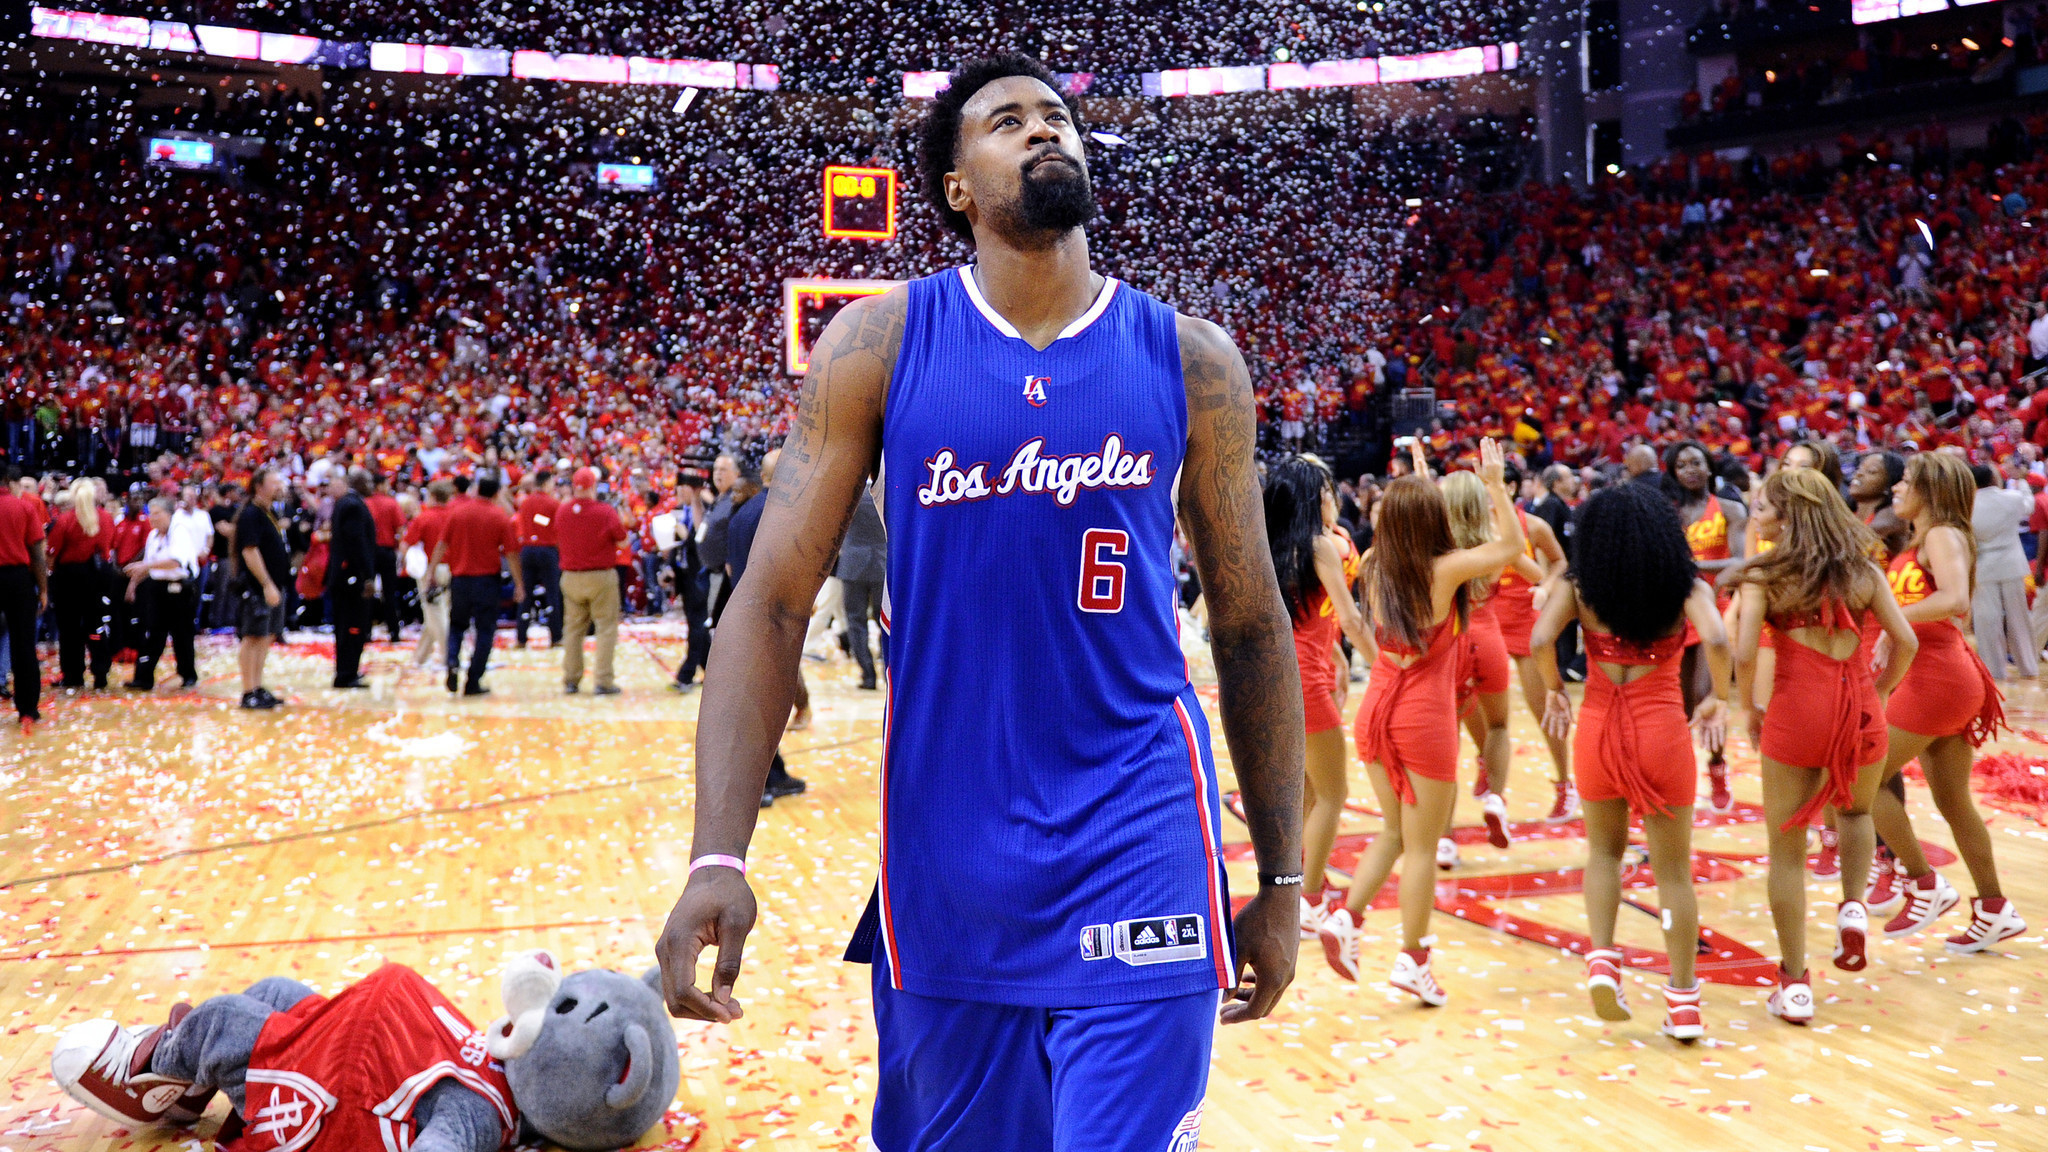 Clippers players want to keep roster intact despite Game 7 loss - LA Times2048 x 1152